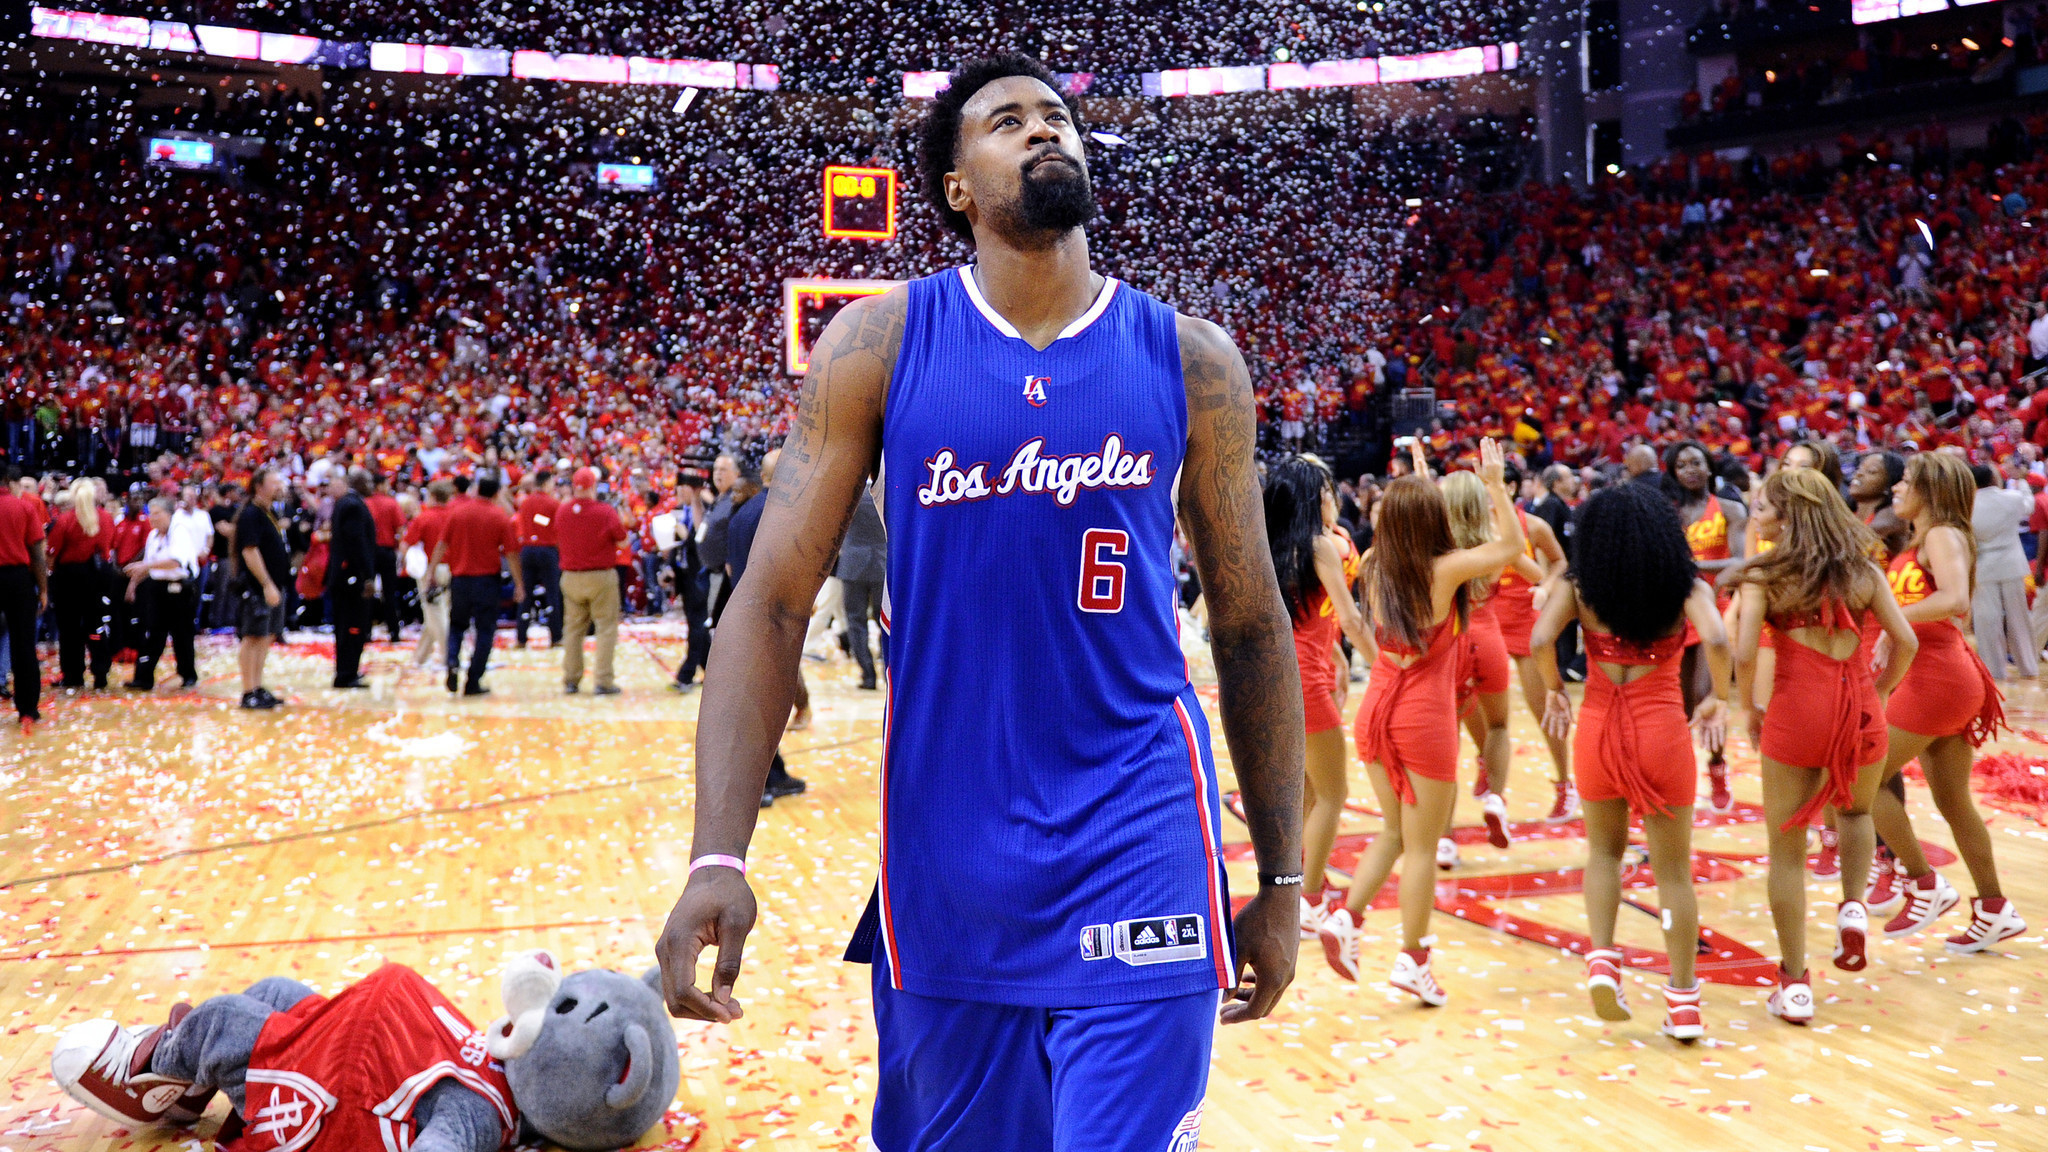 Clippers players want to keep roster intact despite Game 7 loss - LA Times2048 x 1152